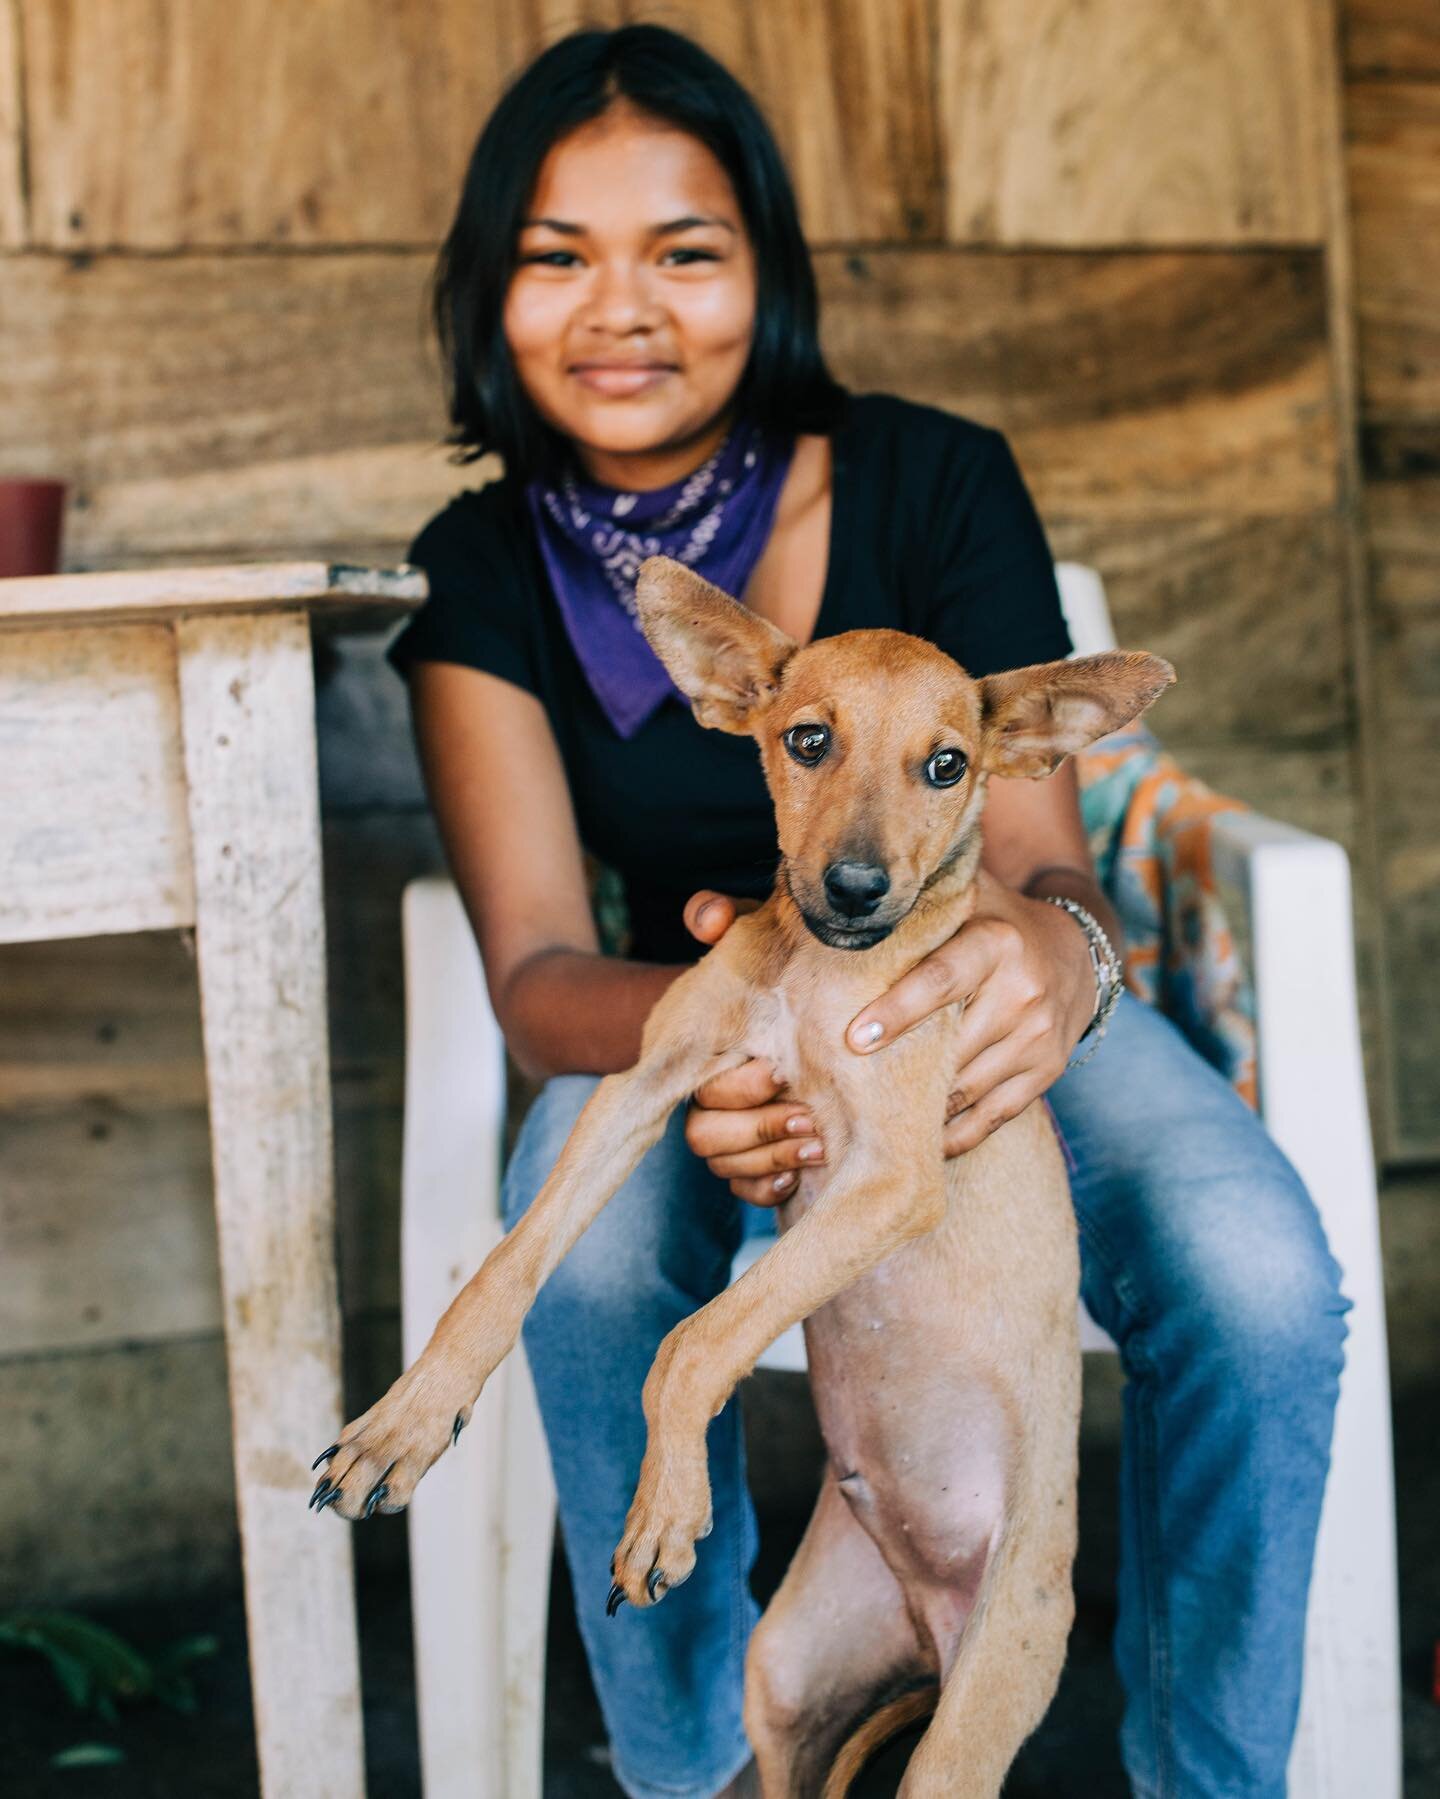 Our vaccination campaign continues this weekend! On Friday and Sunday, we will return to the rural communities of Escamequita, Las Parcelas and Las Brisas to administer the second round of vaccine doses to our furry friends ✨

We&rsquo;re feeling awe